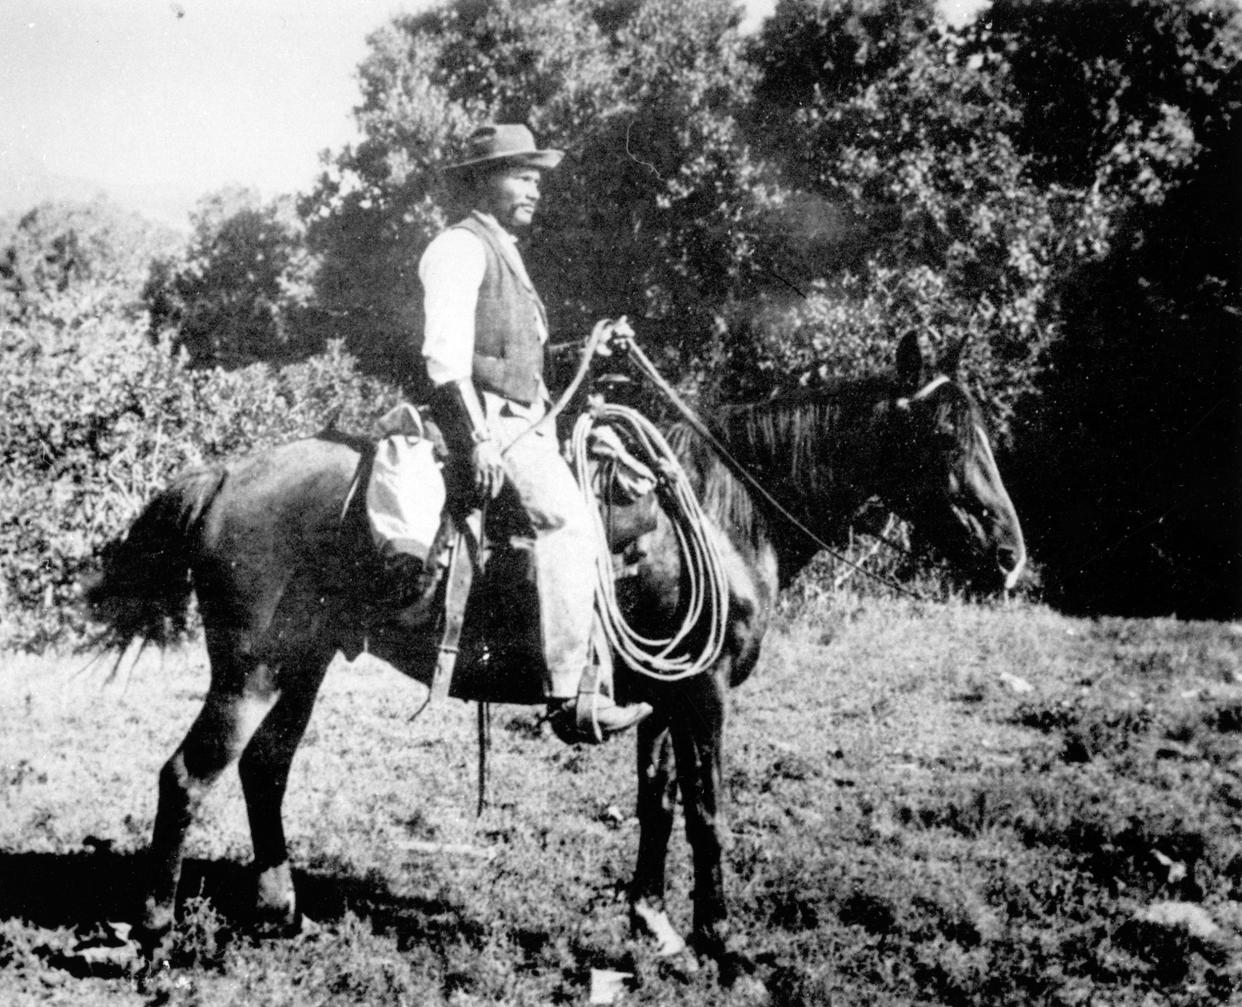 The photograph "George McJunkin," circa 1925, is featured in the exhibit "Black Cowboys: An American Story," on view through Jan. 2 at the National Cowboy & Western Heritage Museum.